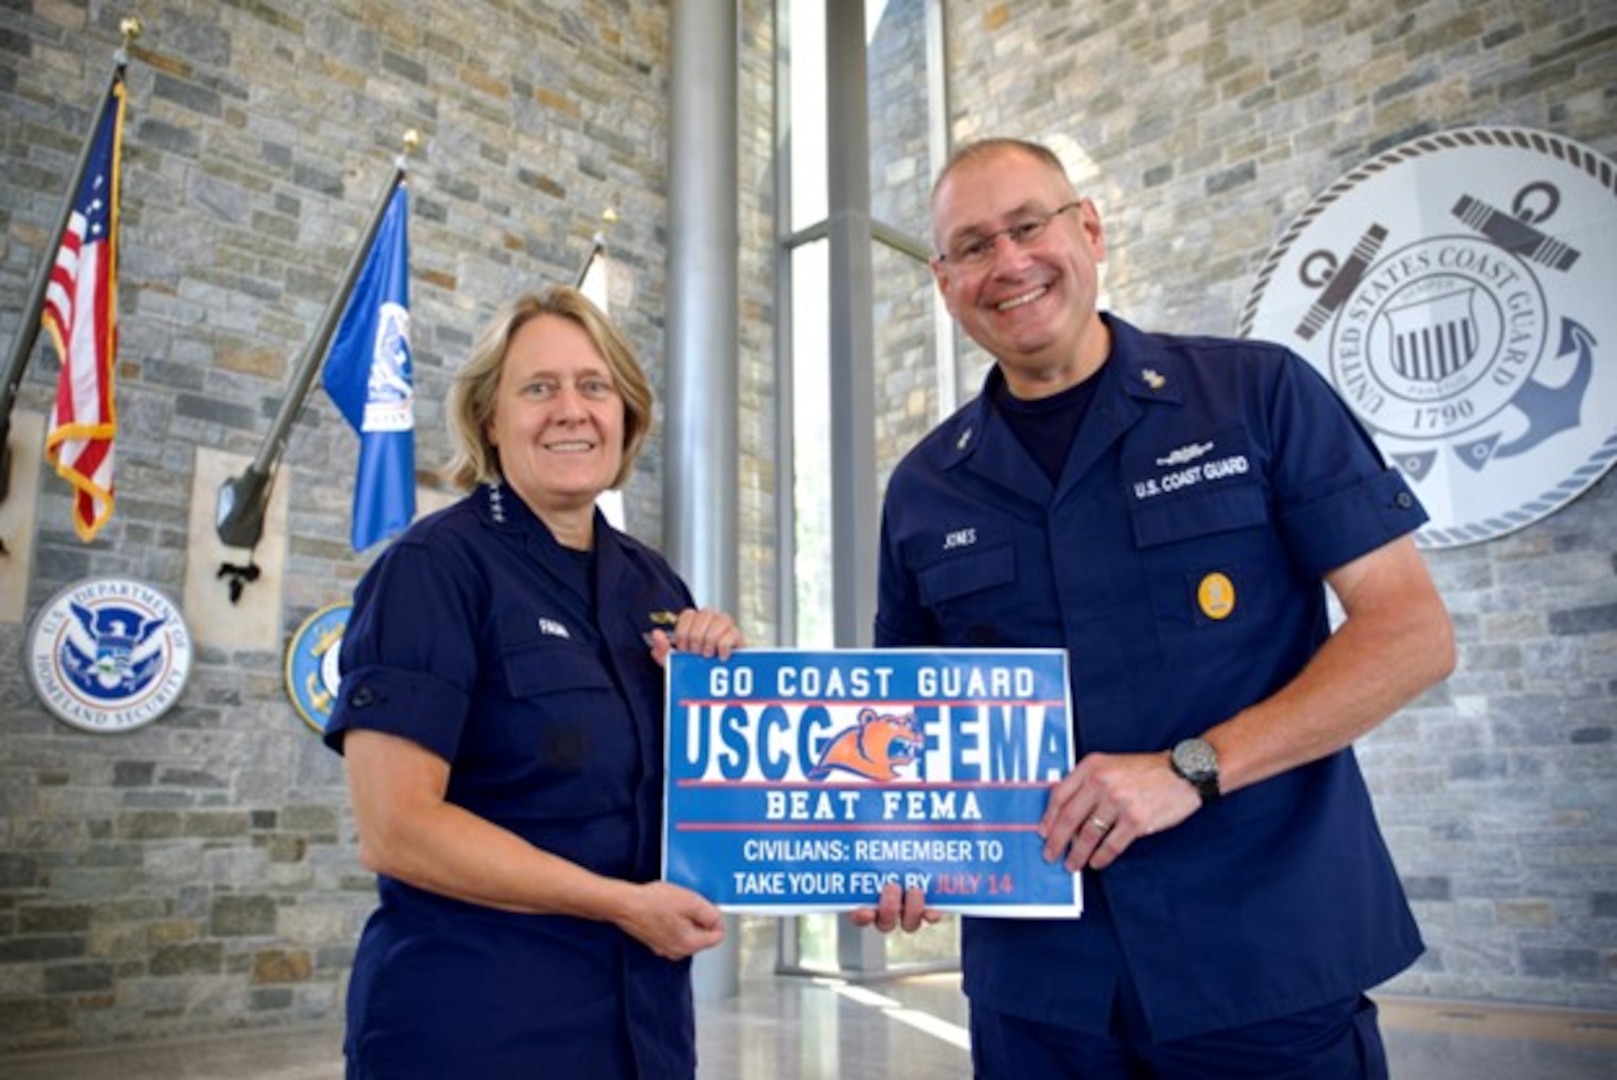 The Coast Guard has challenged FEMA to beat our FEVS participation rates. We've always lagged behind, but USCG has pulled ahead and may actually win this thing! ADM Linda Fagan and MCPOCG Heath Jones encourage all USCG commands to make sure their civilian employees complete their Federal Employee Viewpoint Survey by this Friday,  July 14. EVHS@opm.gov emailed the survey May 16 to every eligible civilian. Photo by PA3 Erik Villa Rodriguez.